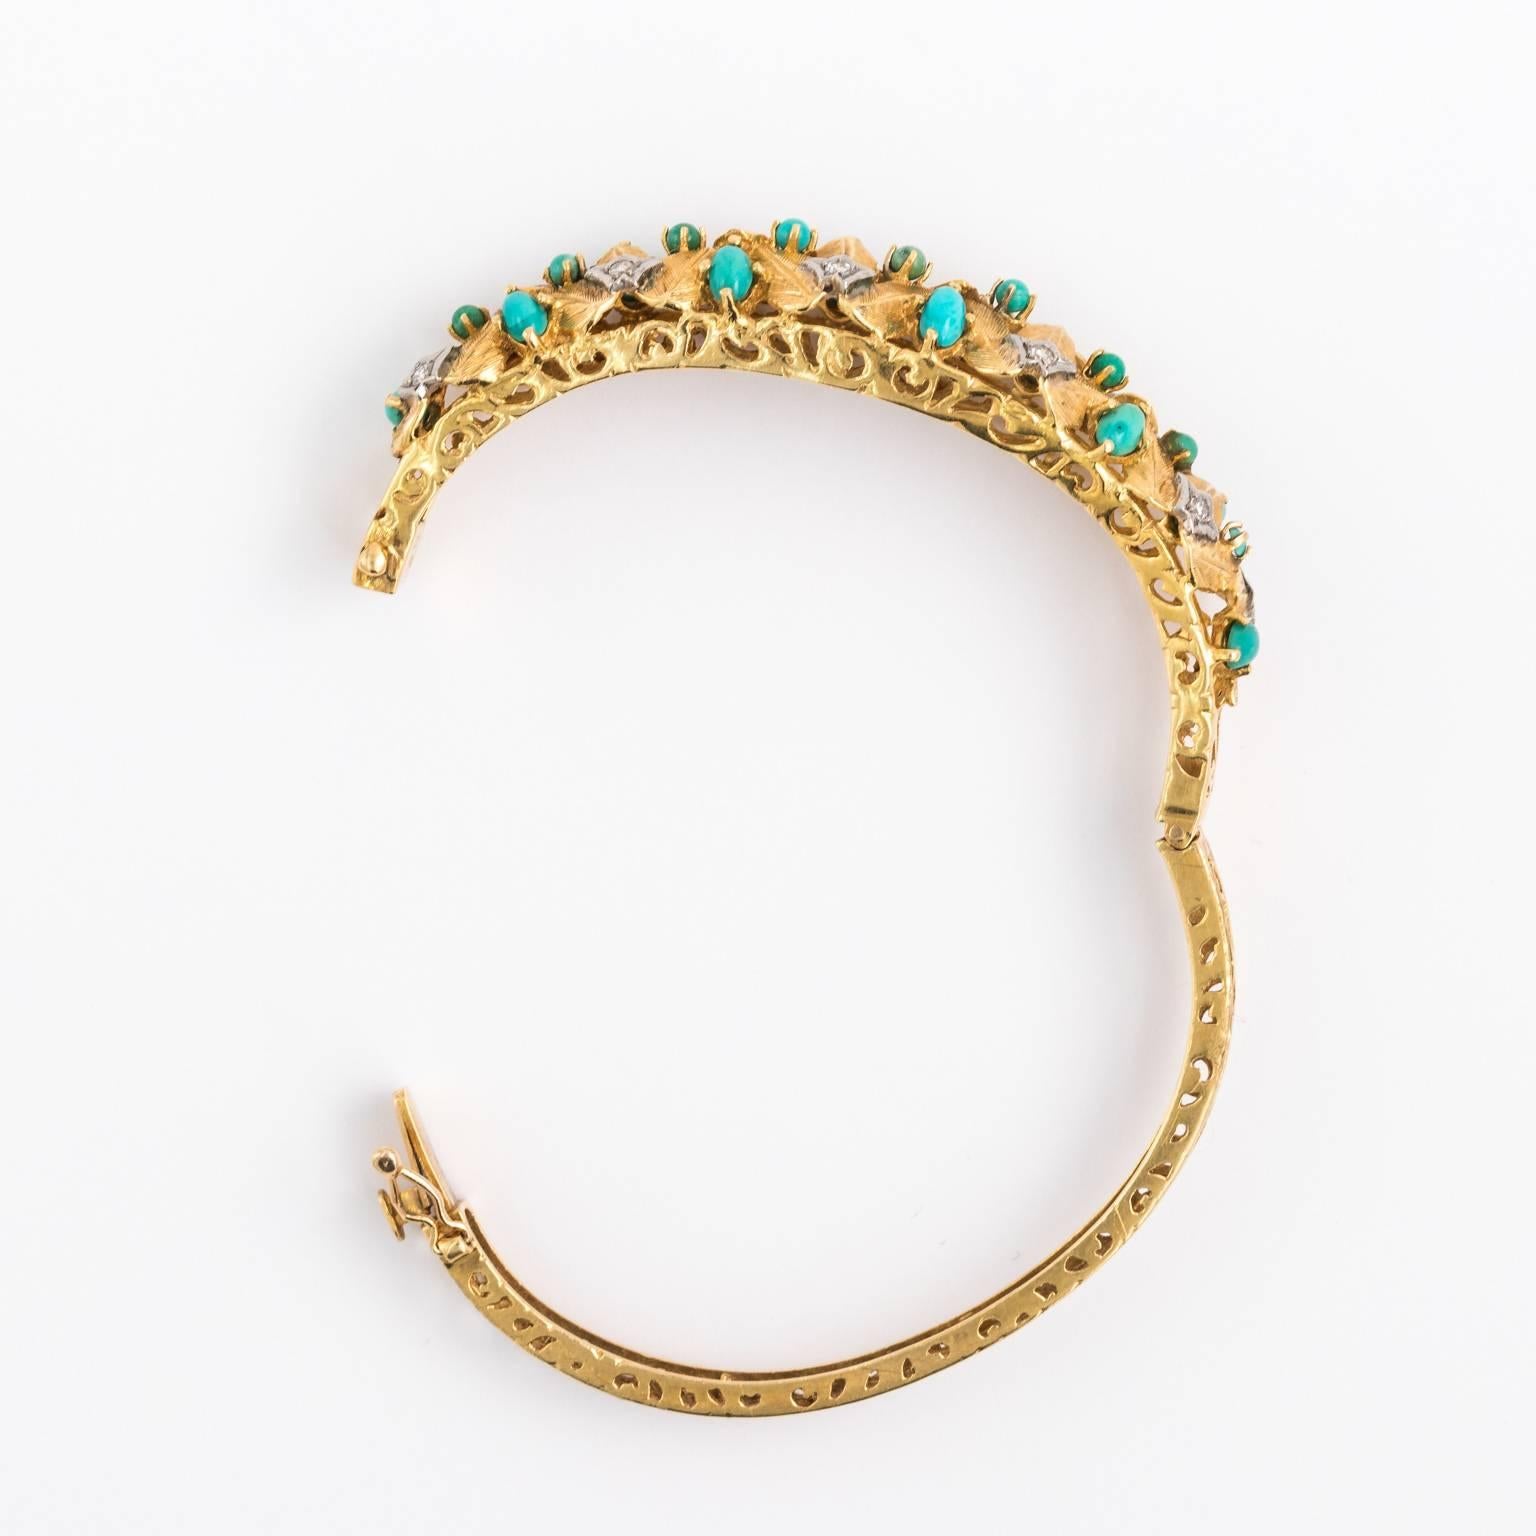 Circa 1950s 18 karat gold cuff bracelet with approximately two carats of Turquoise and 20 pts. of medium diamonds. Detail is etched gold leaf interspaced with stones. Clasp includes a safety catch.
